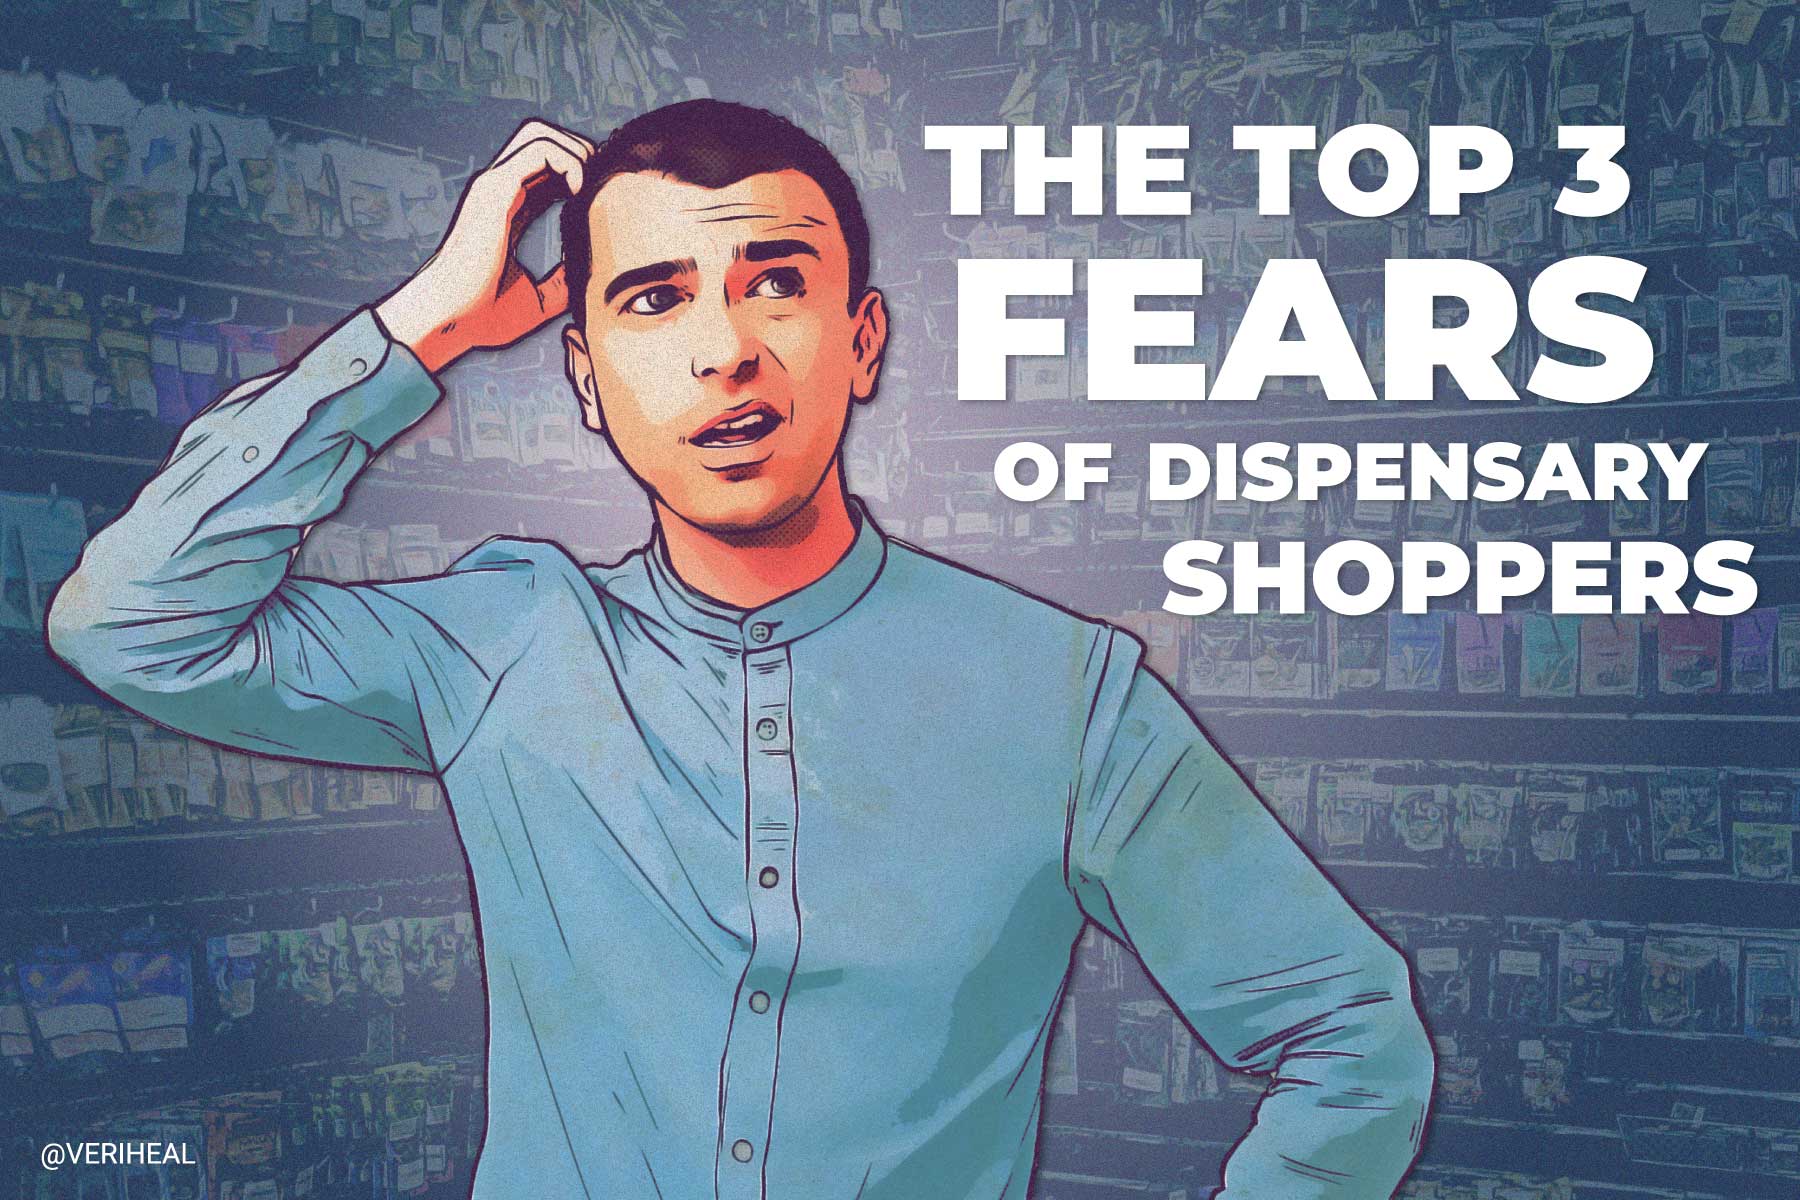 The Top 3 Fears of Dispensary Shoppers